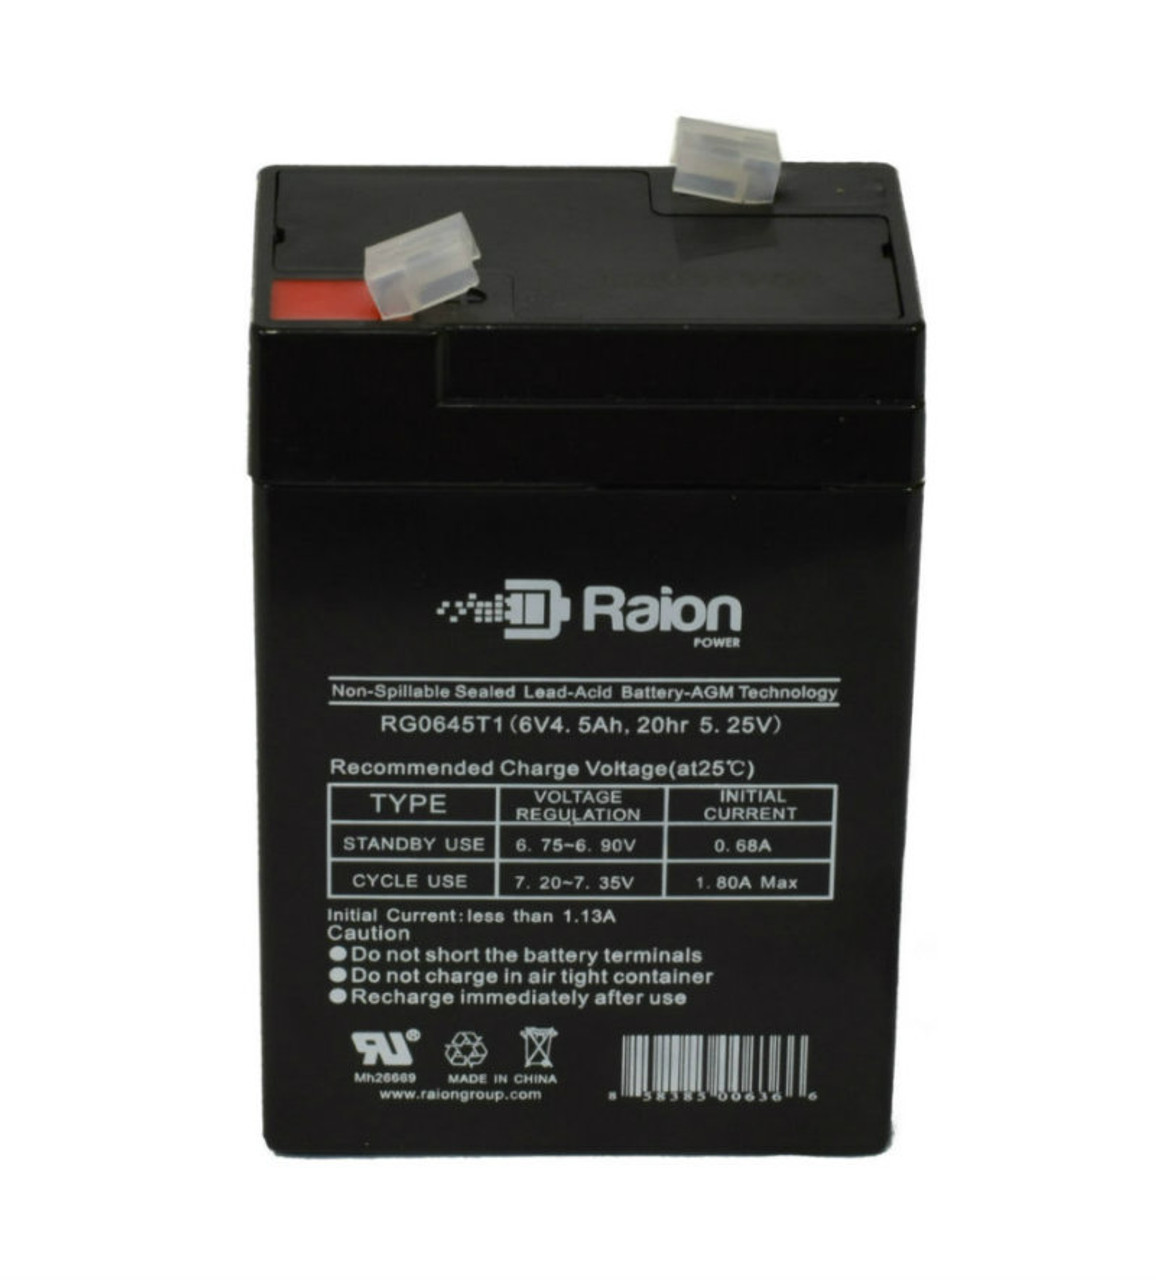 Raion Power RG0645T1 Replacement Battery Cartridge for Tianchang TC6-4